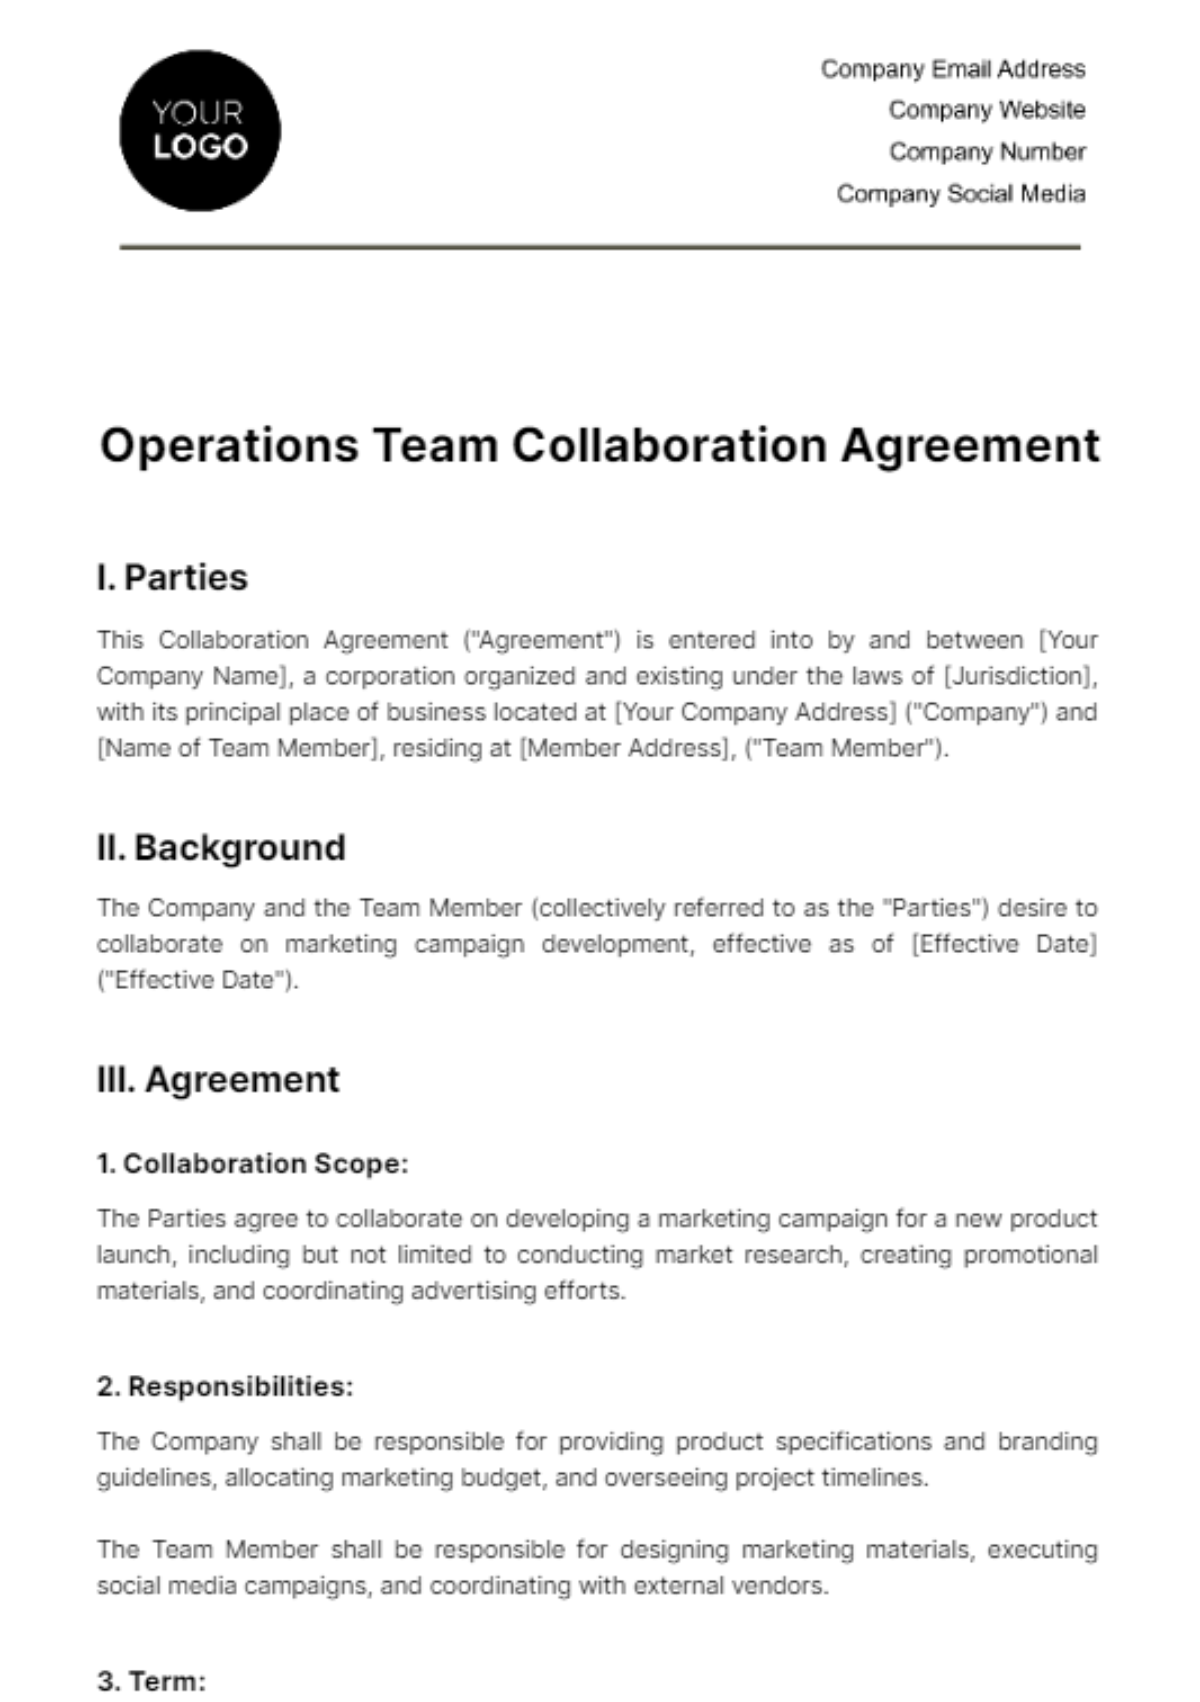 Operations Team Collaboration Agreement Template